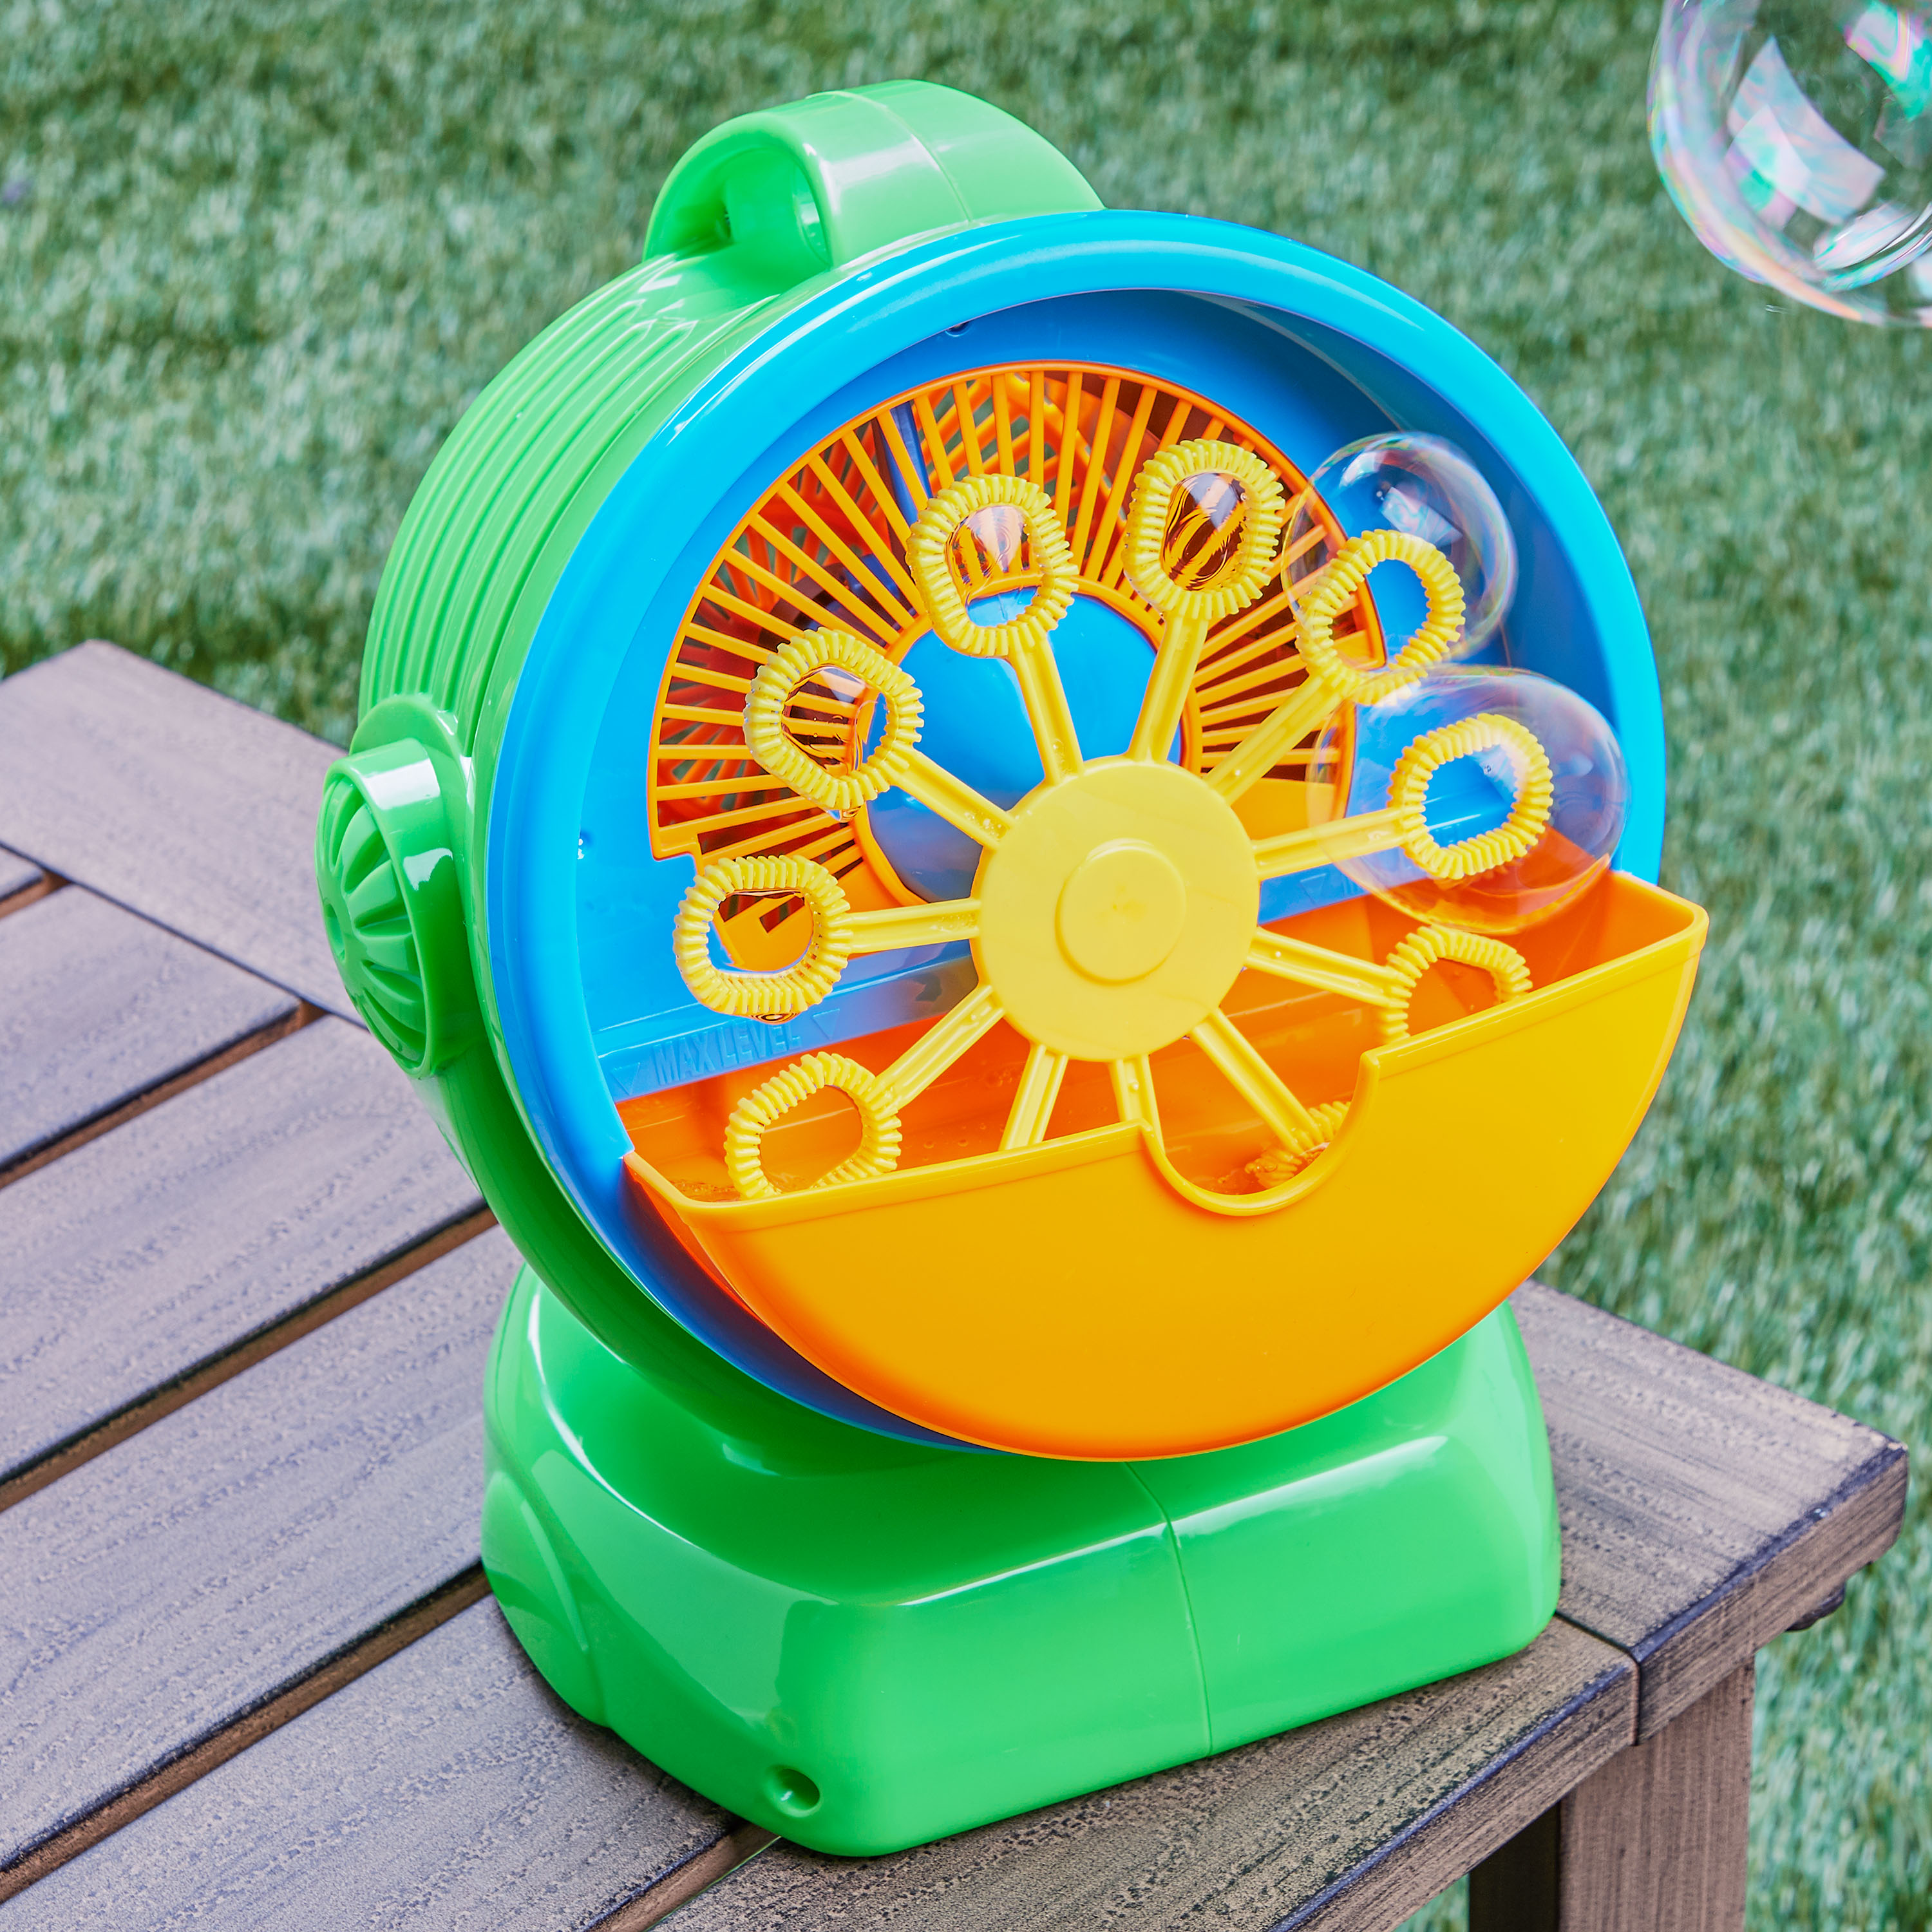 Play Day Mega Bubble Blower, Battery Operated, Bubble Blowing Toy Machine - image 5 of 7